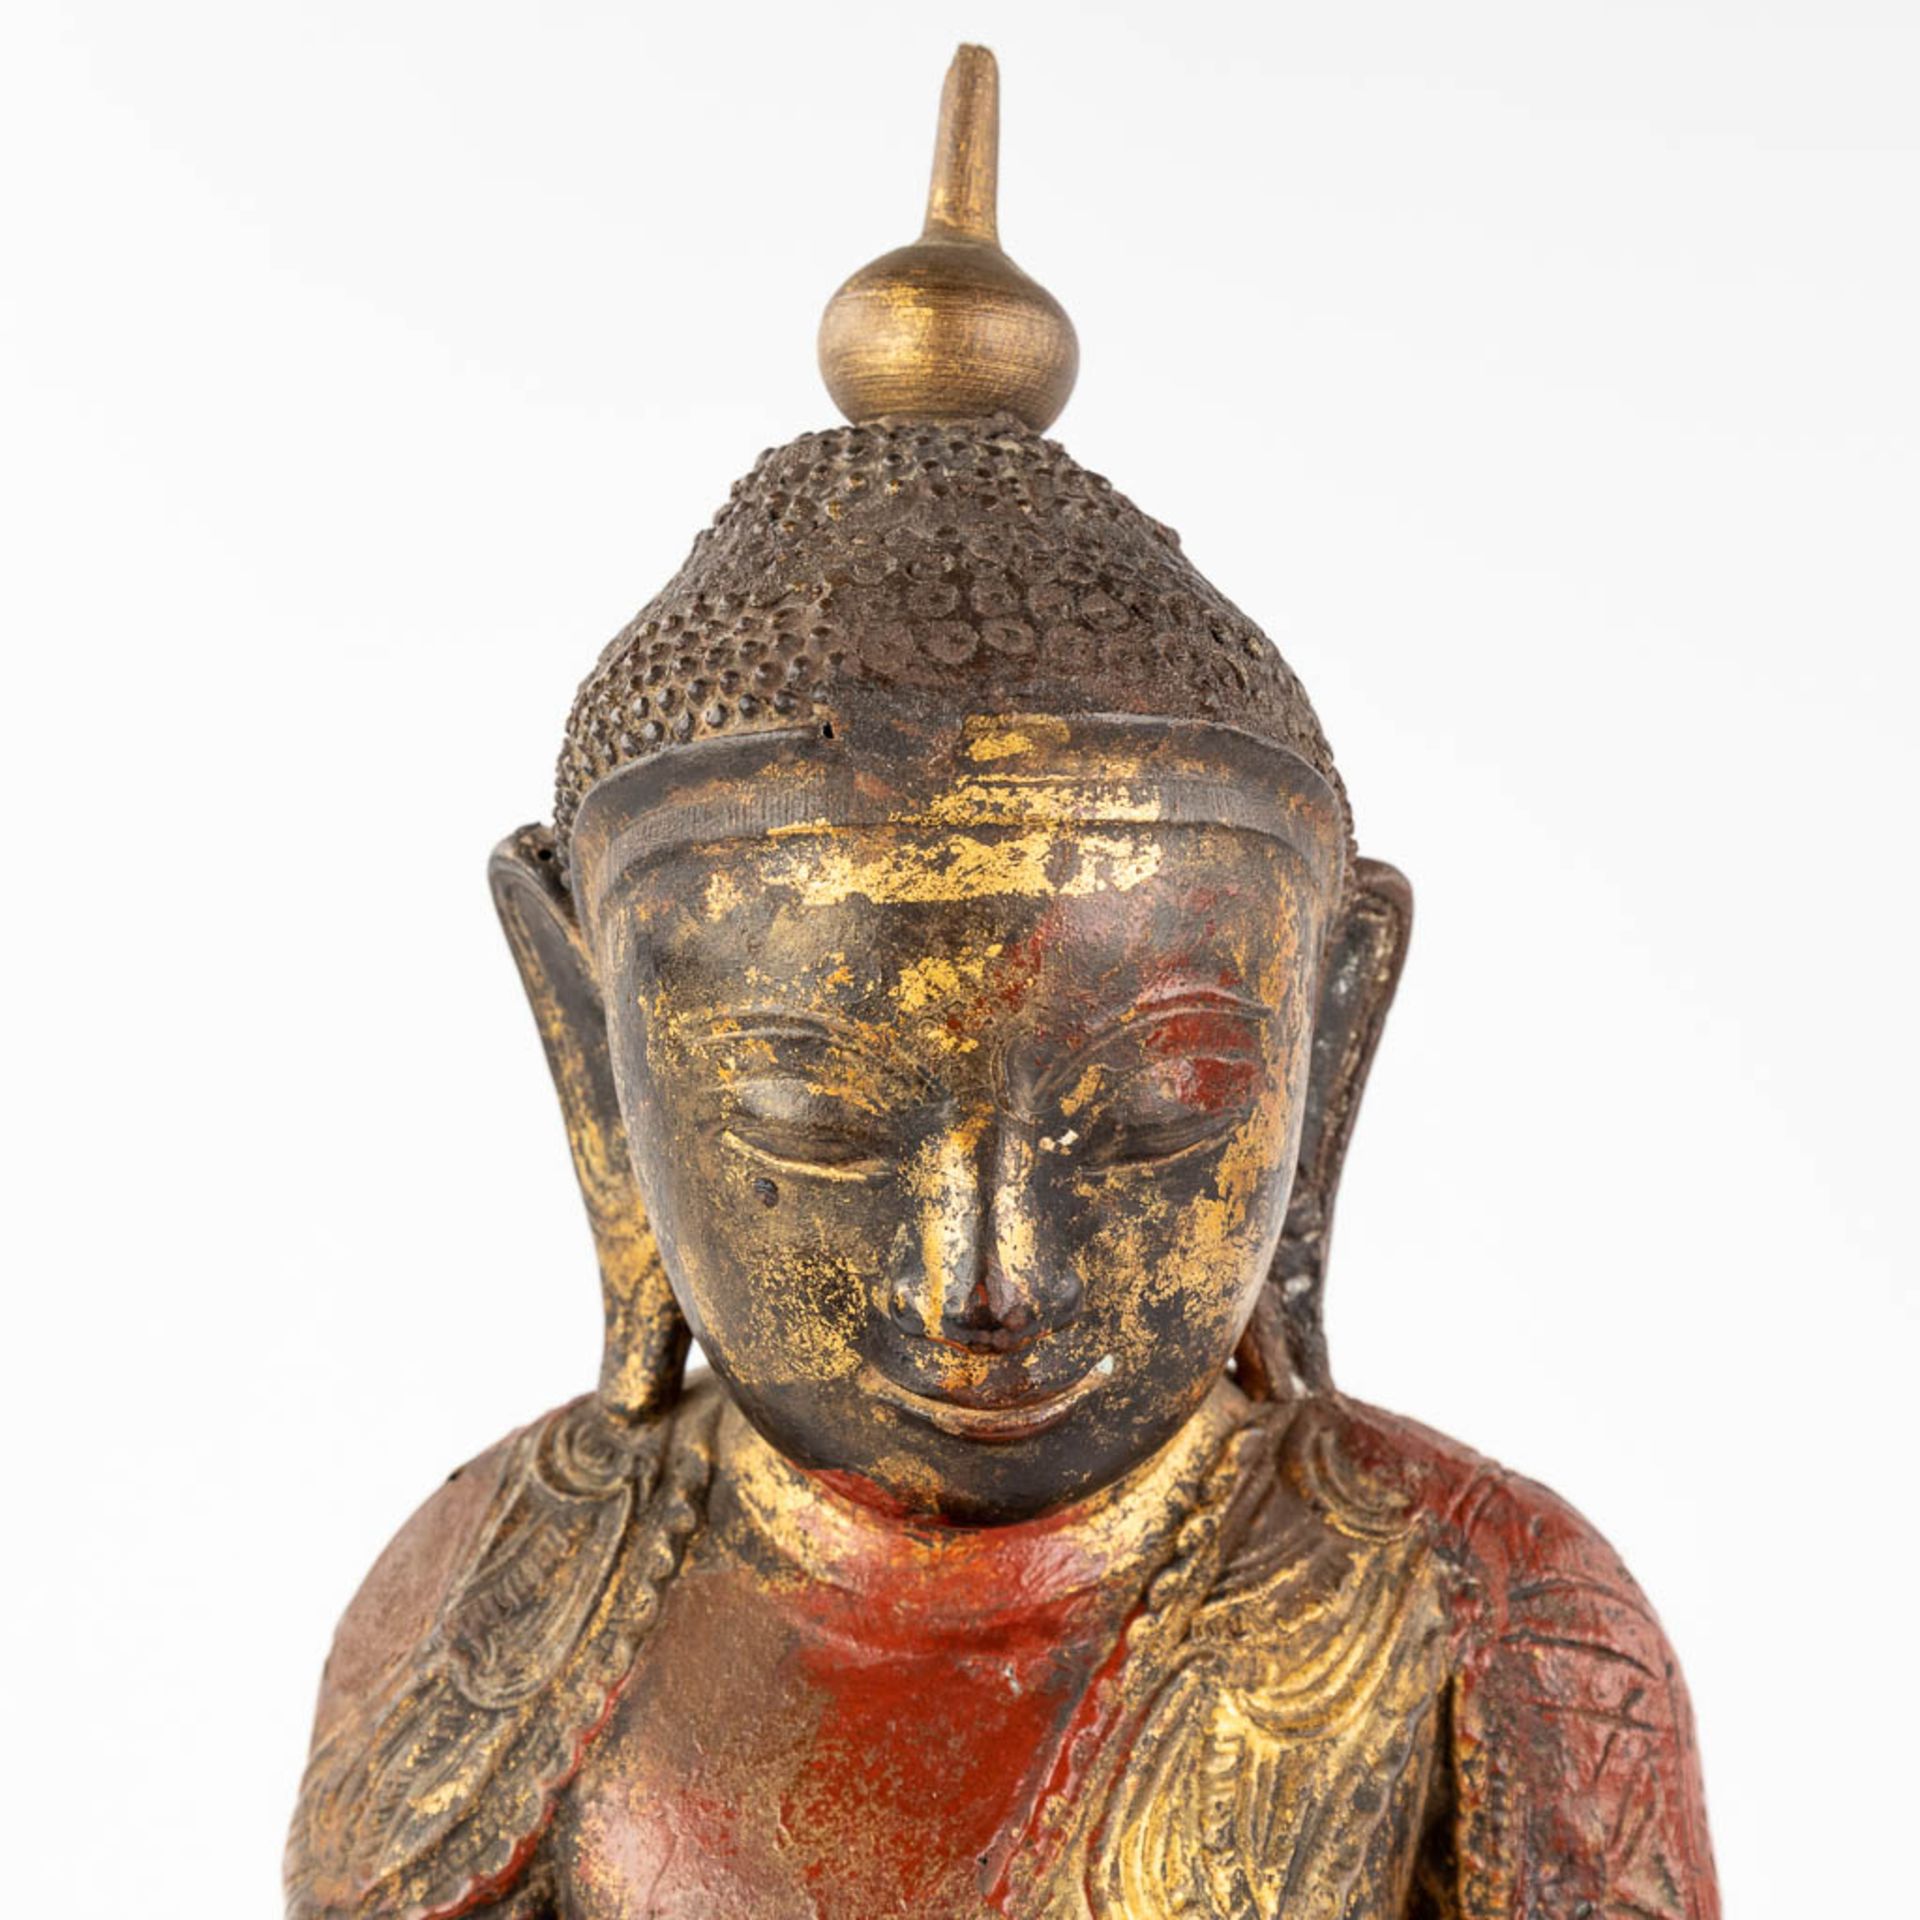 A collection of two wood-sculptured buddha statues, 19th/20th C. (W: 29 x H: 60 cm) - Image 20 of 27